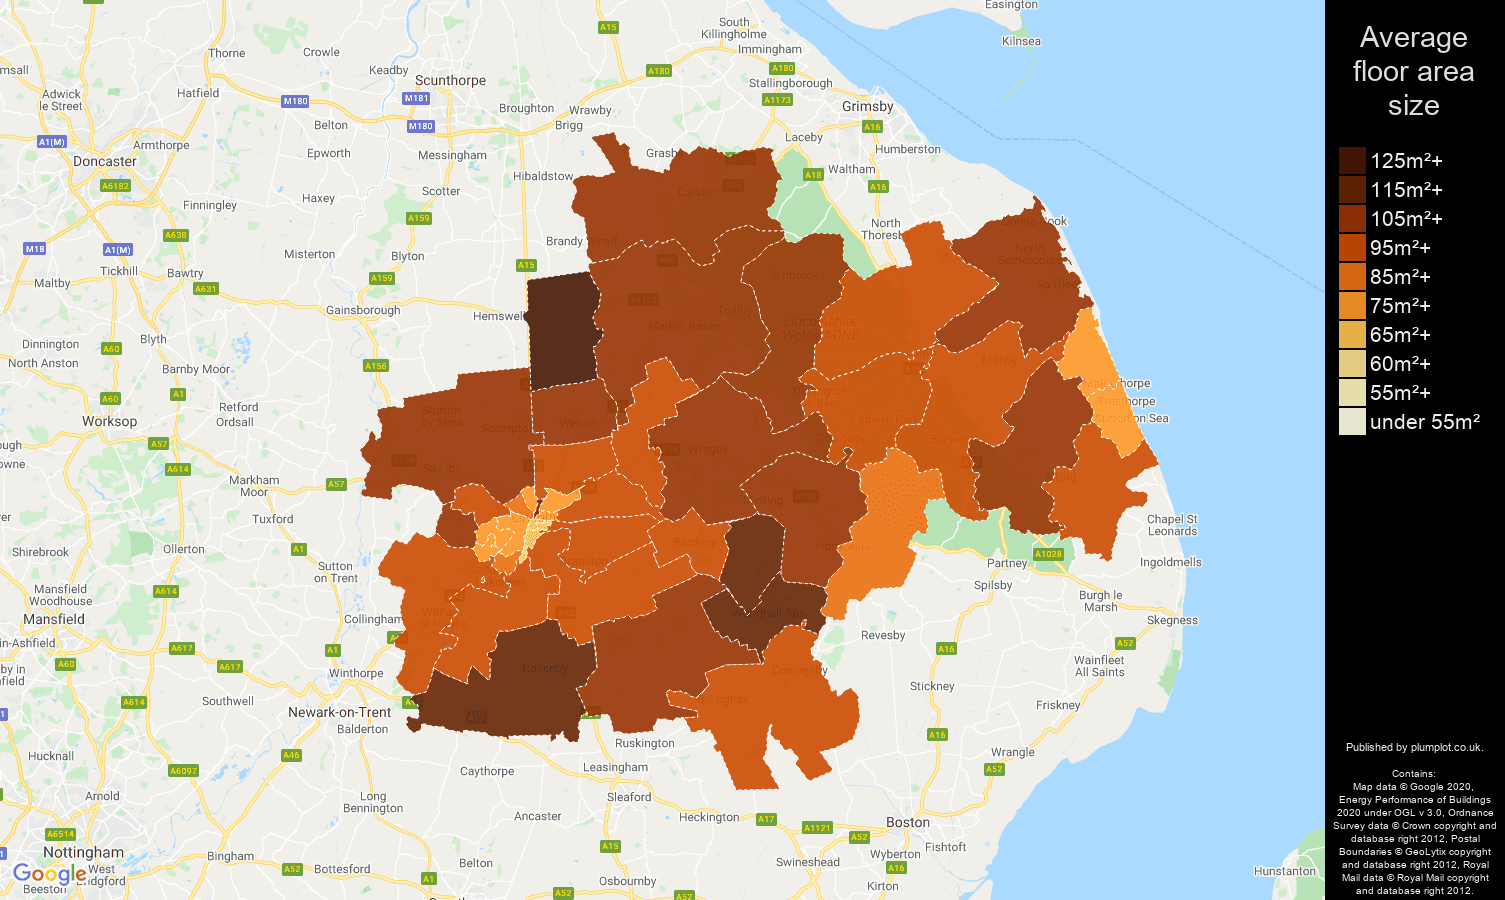 Lincoln map of average floor area size of properties